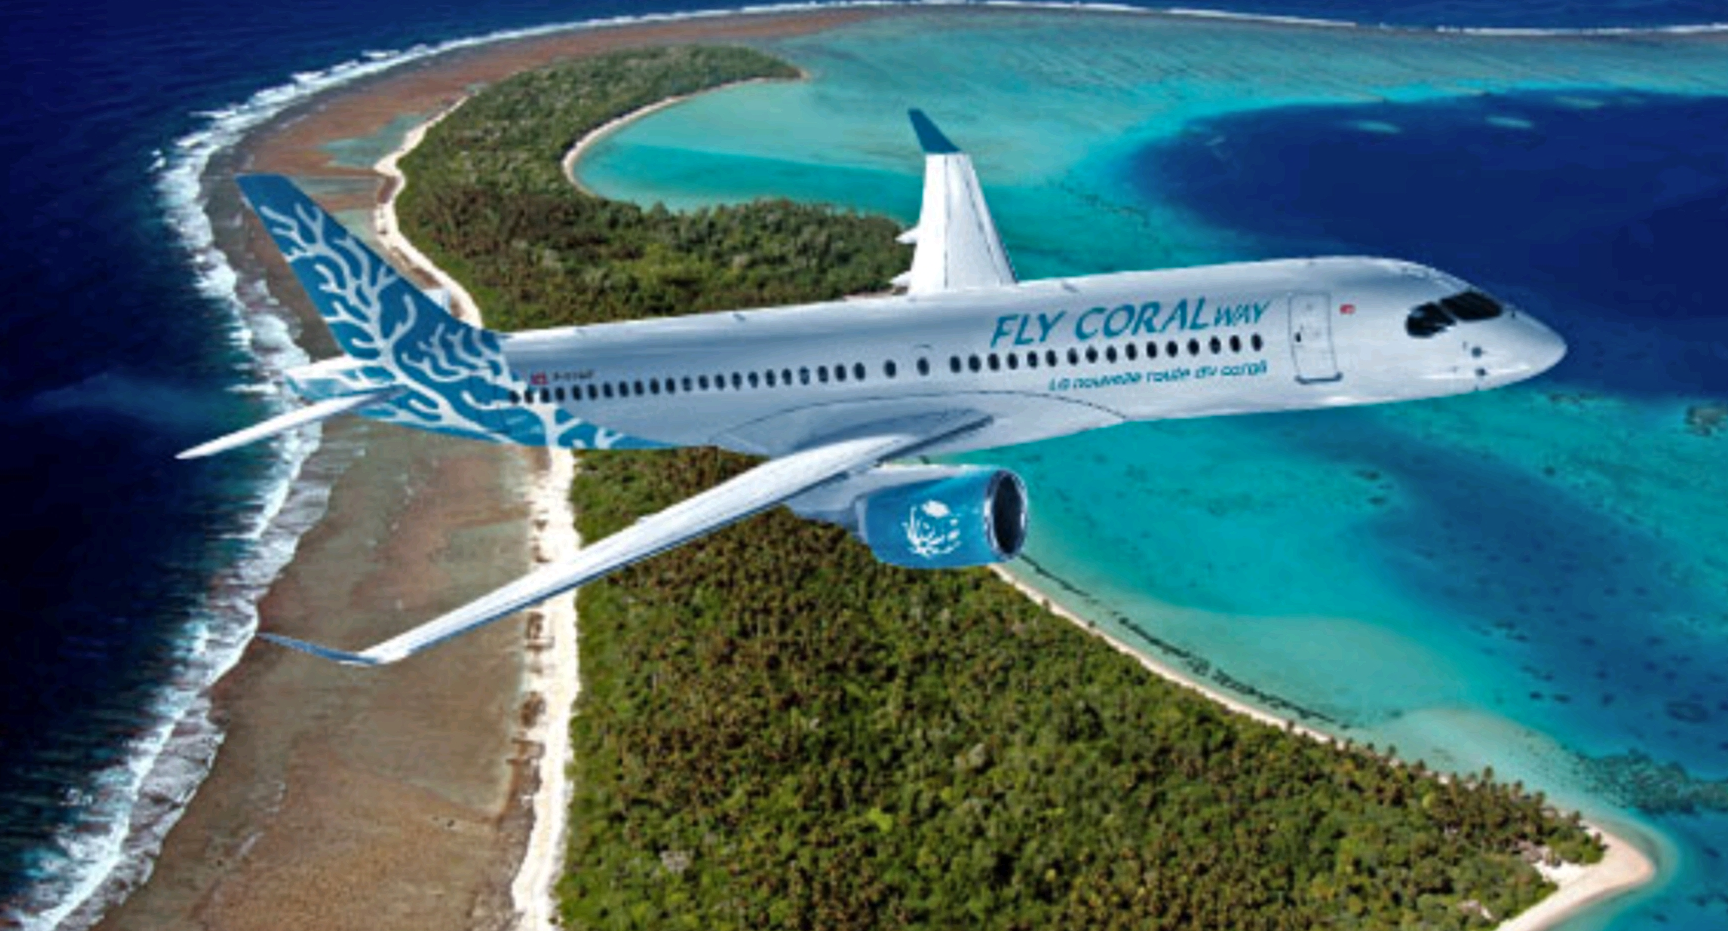 flycoral-way-routes-six-hours-flying-time-tahiti